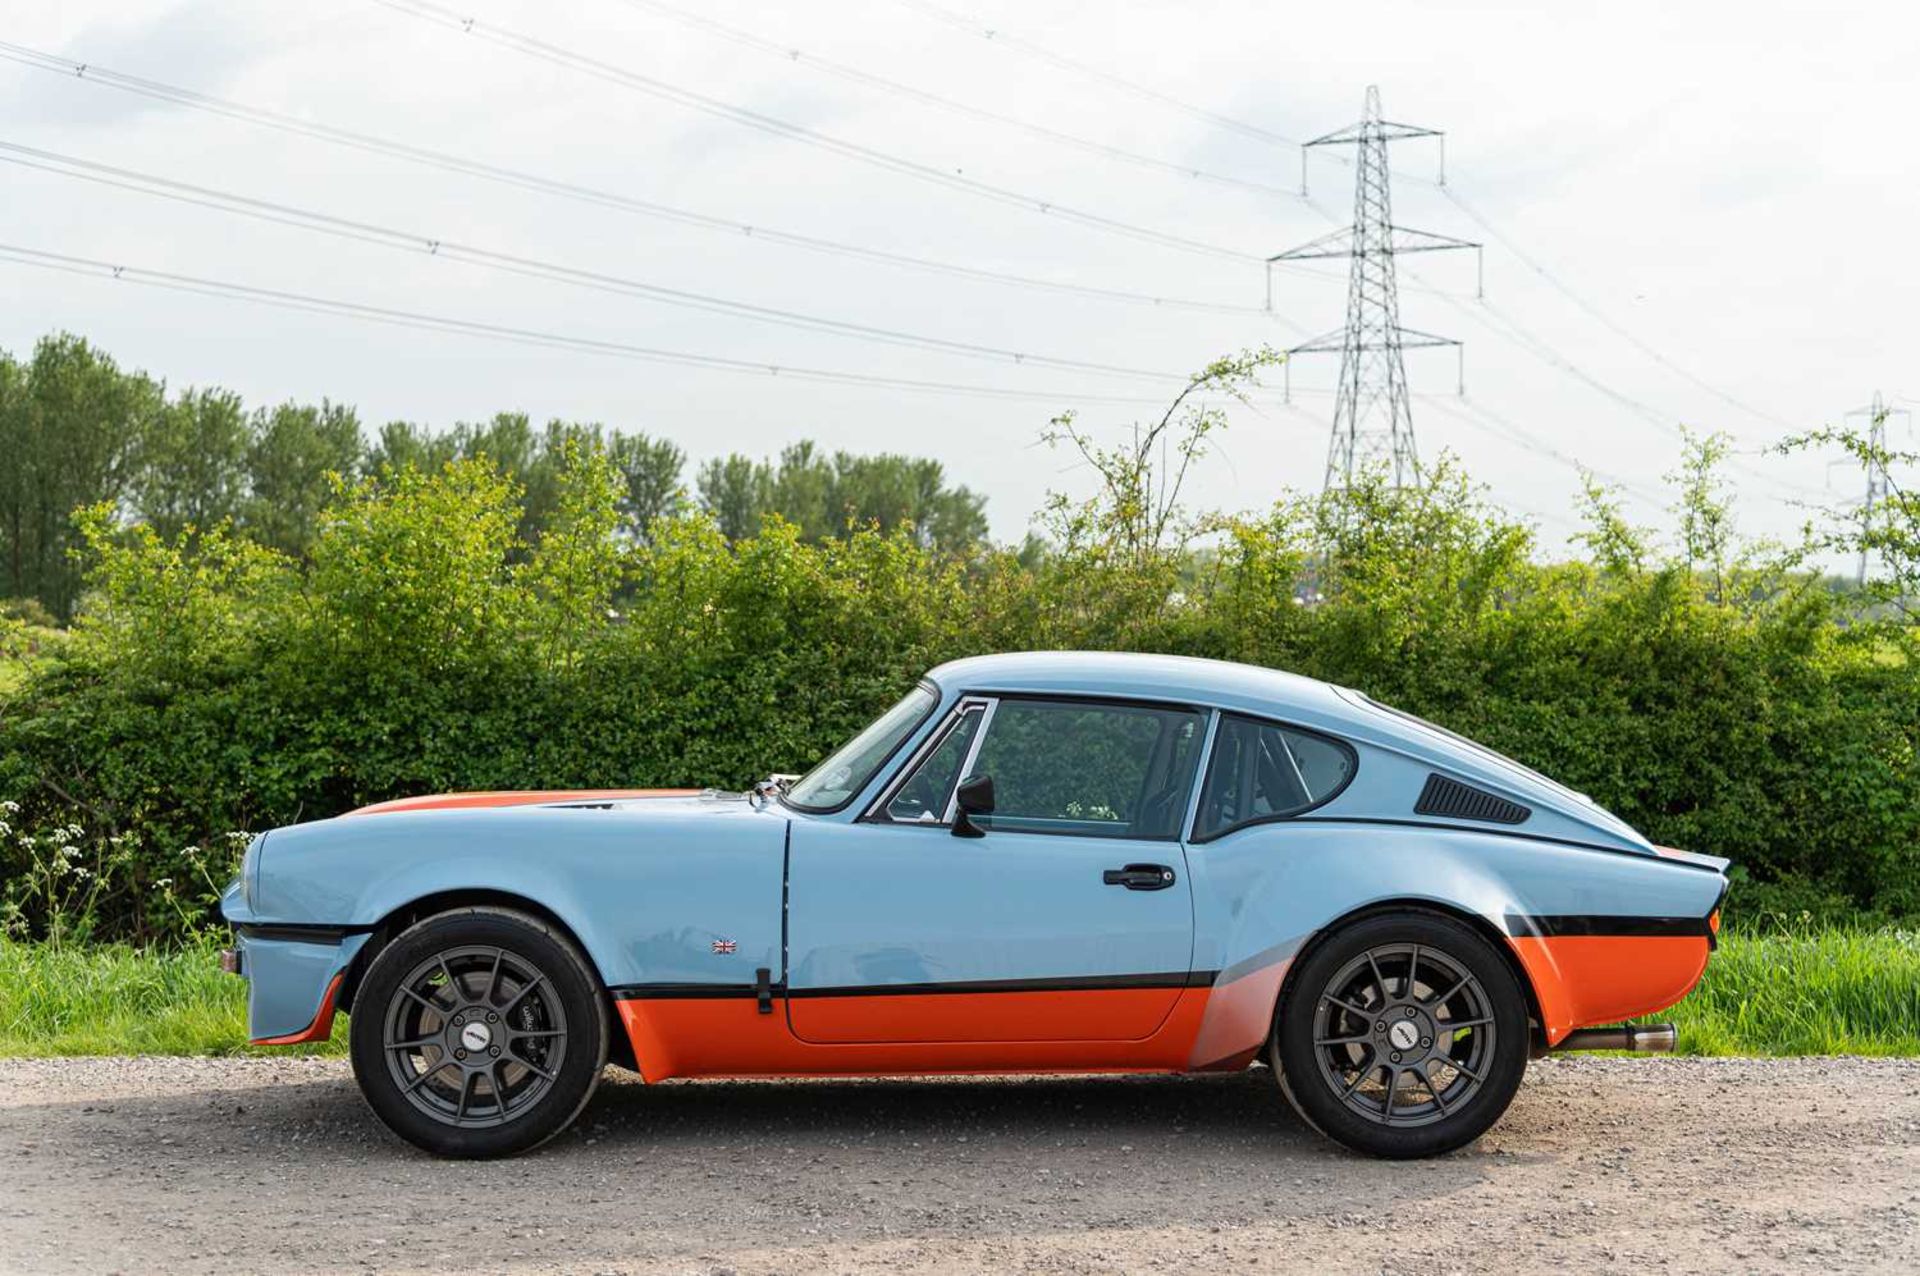 1973 Triumph GT6  ***NO RESERVE*** Presented in Gulf Racing-inspired paintwork, road-going track wea - Bild 8 aus 65